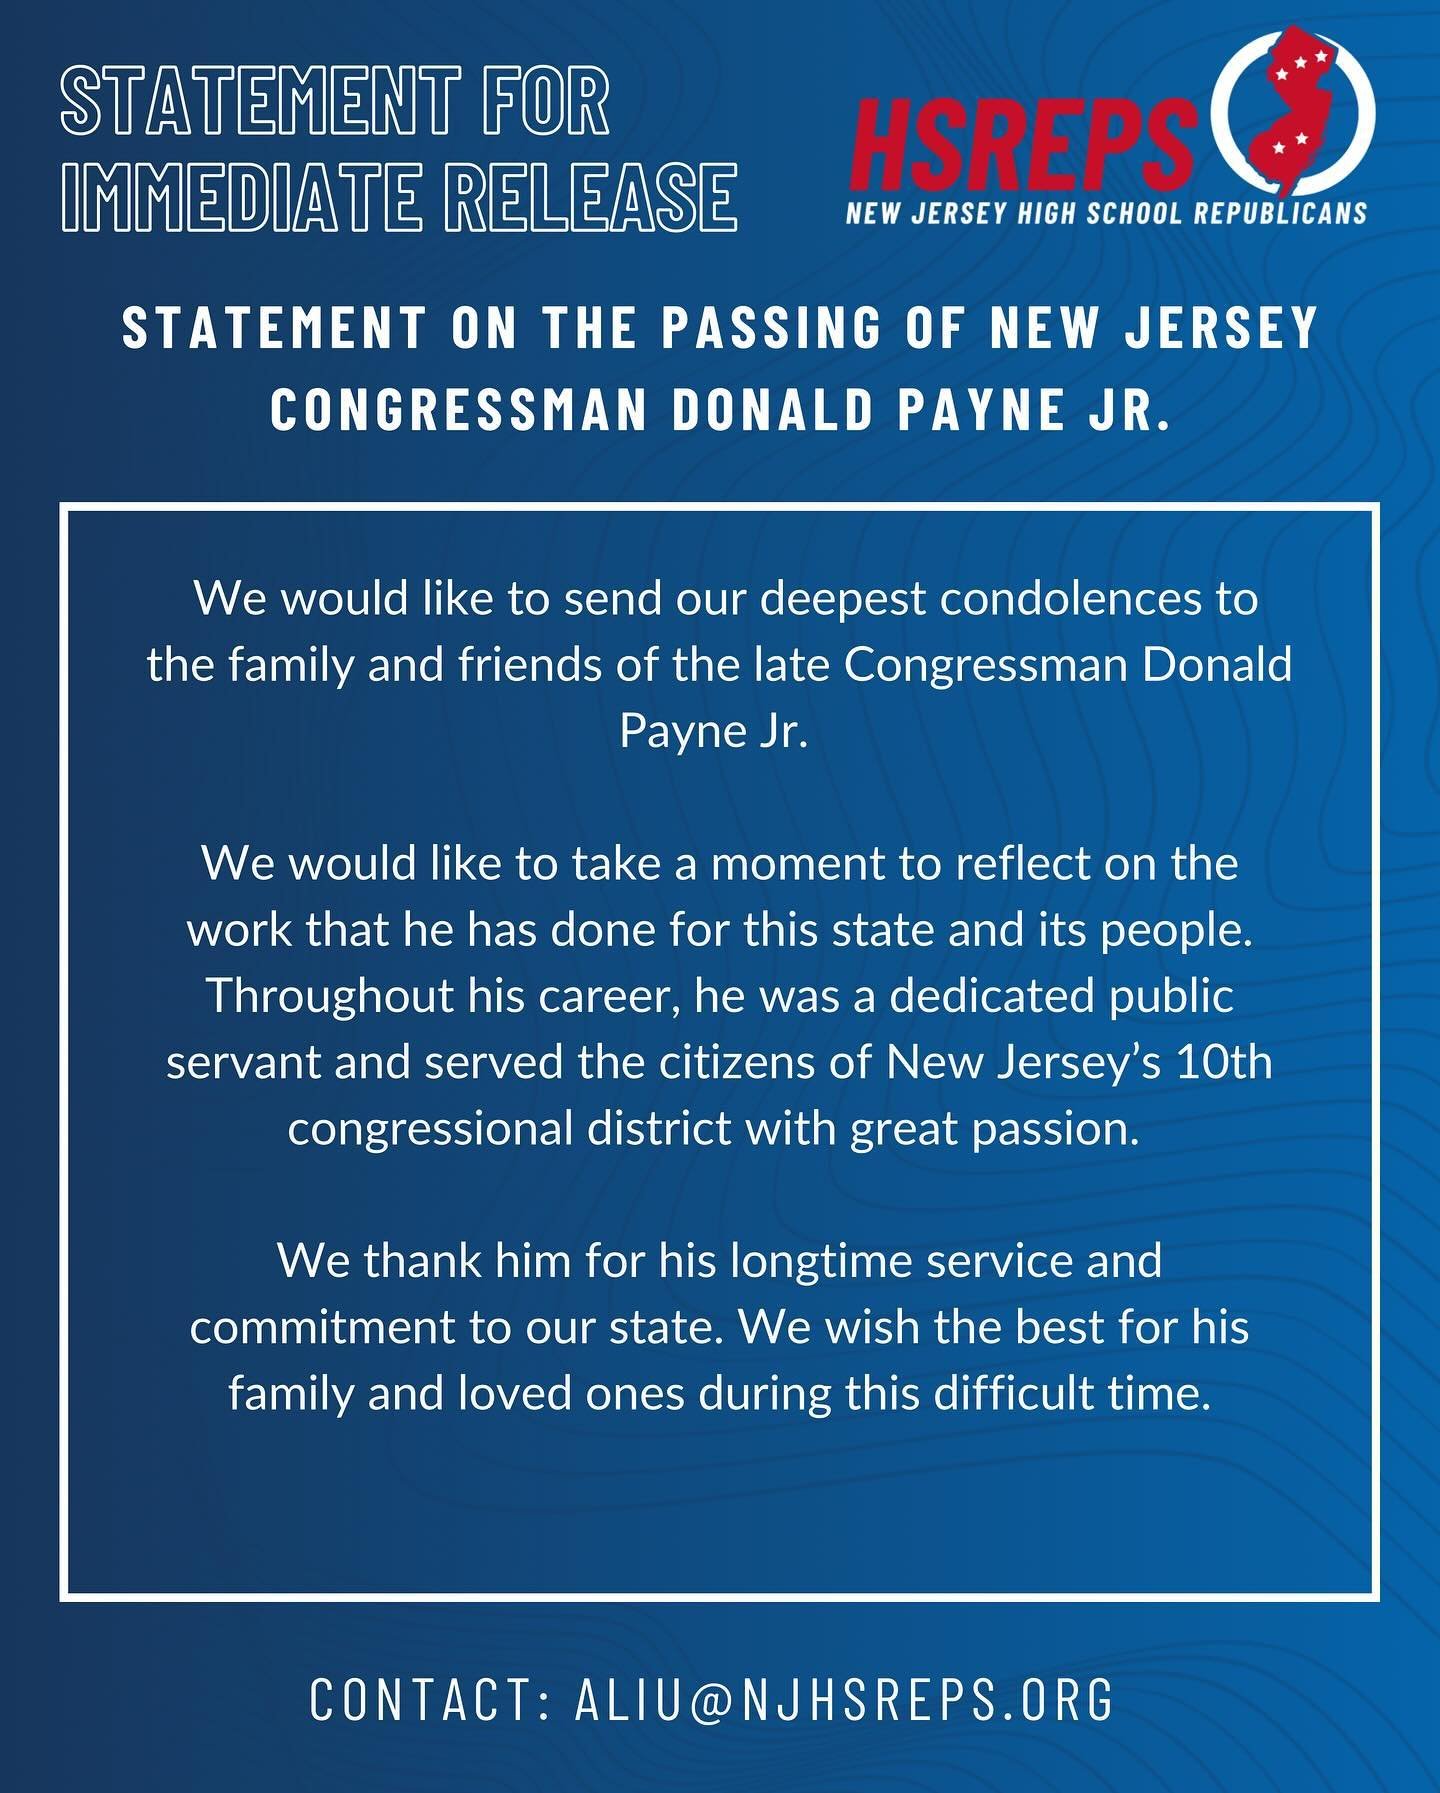 Statement for Immediate Release on the Passing of Congressman Donald Payne Jr. 🙏